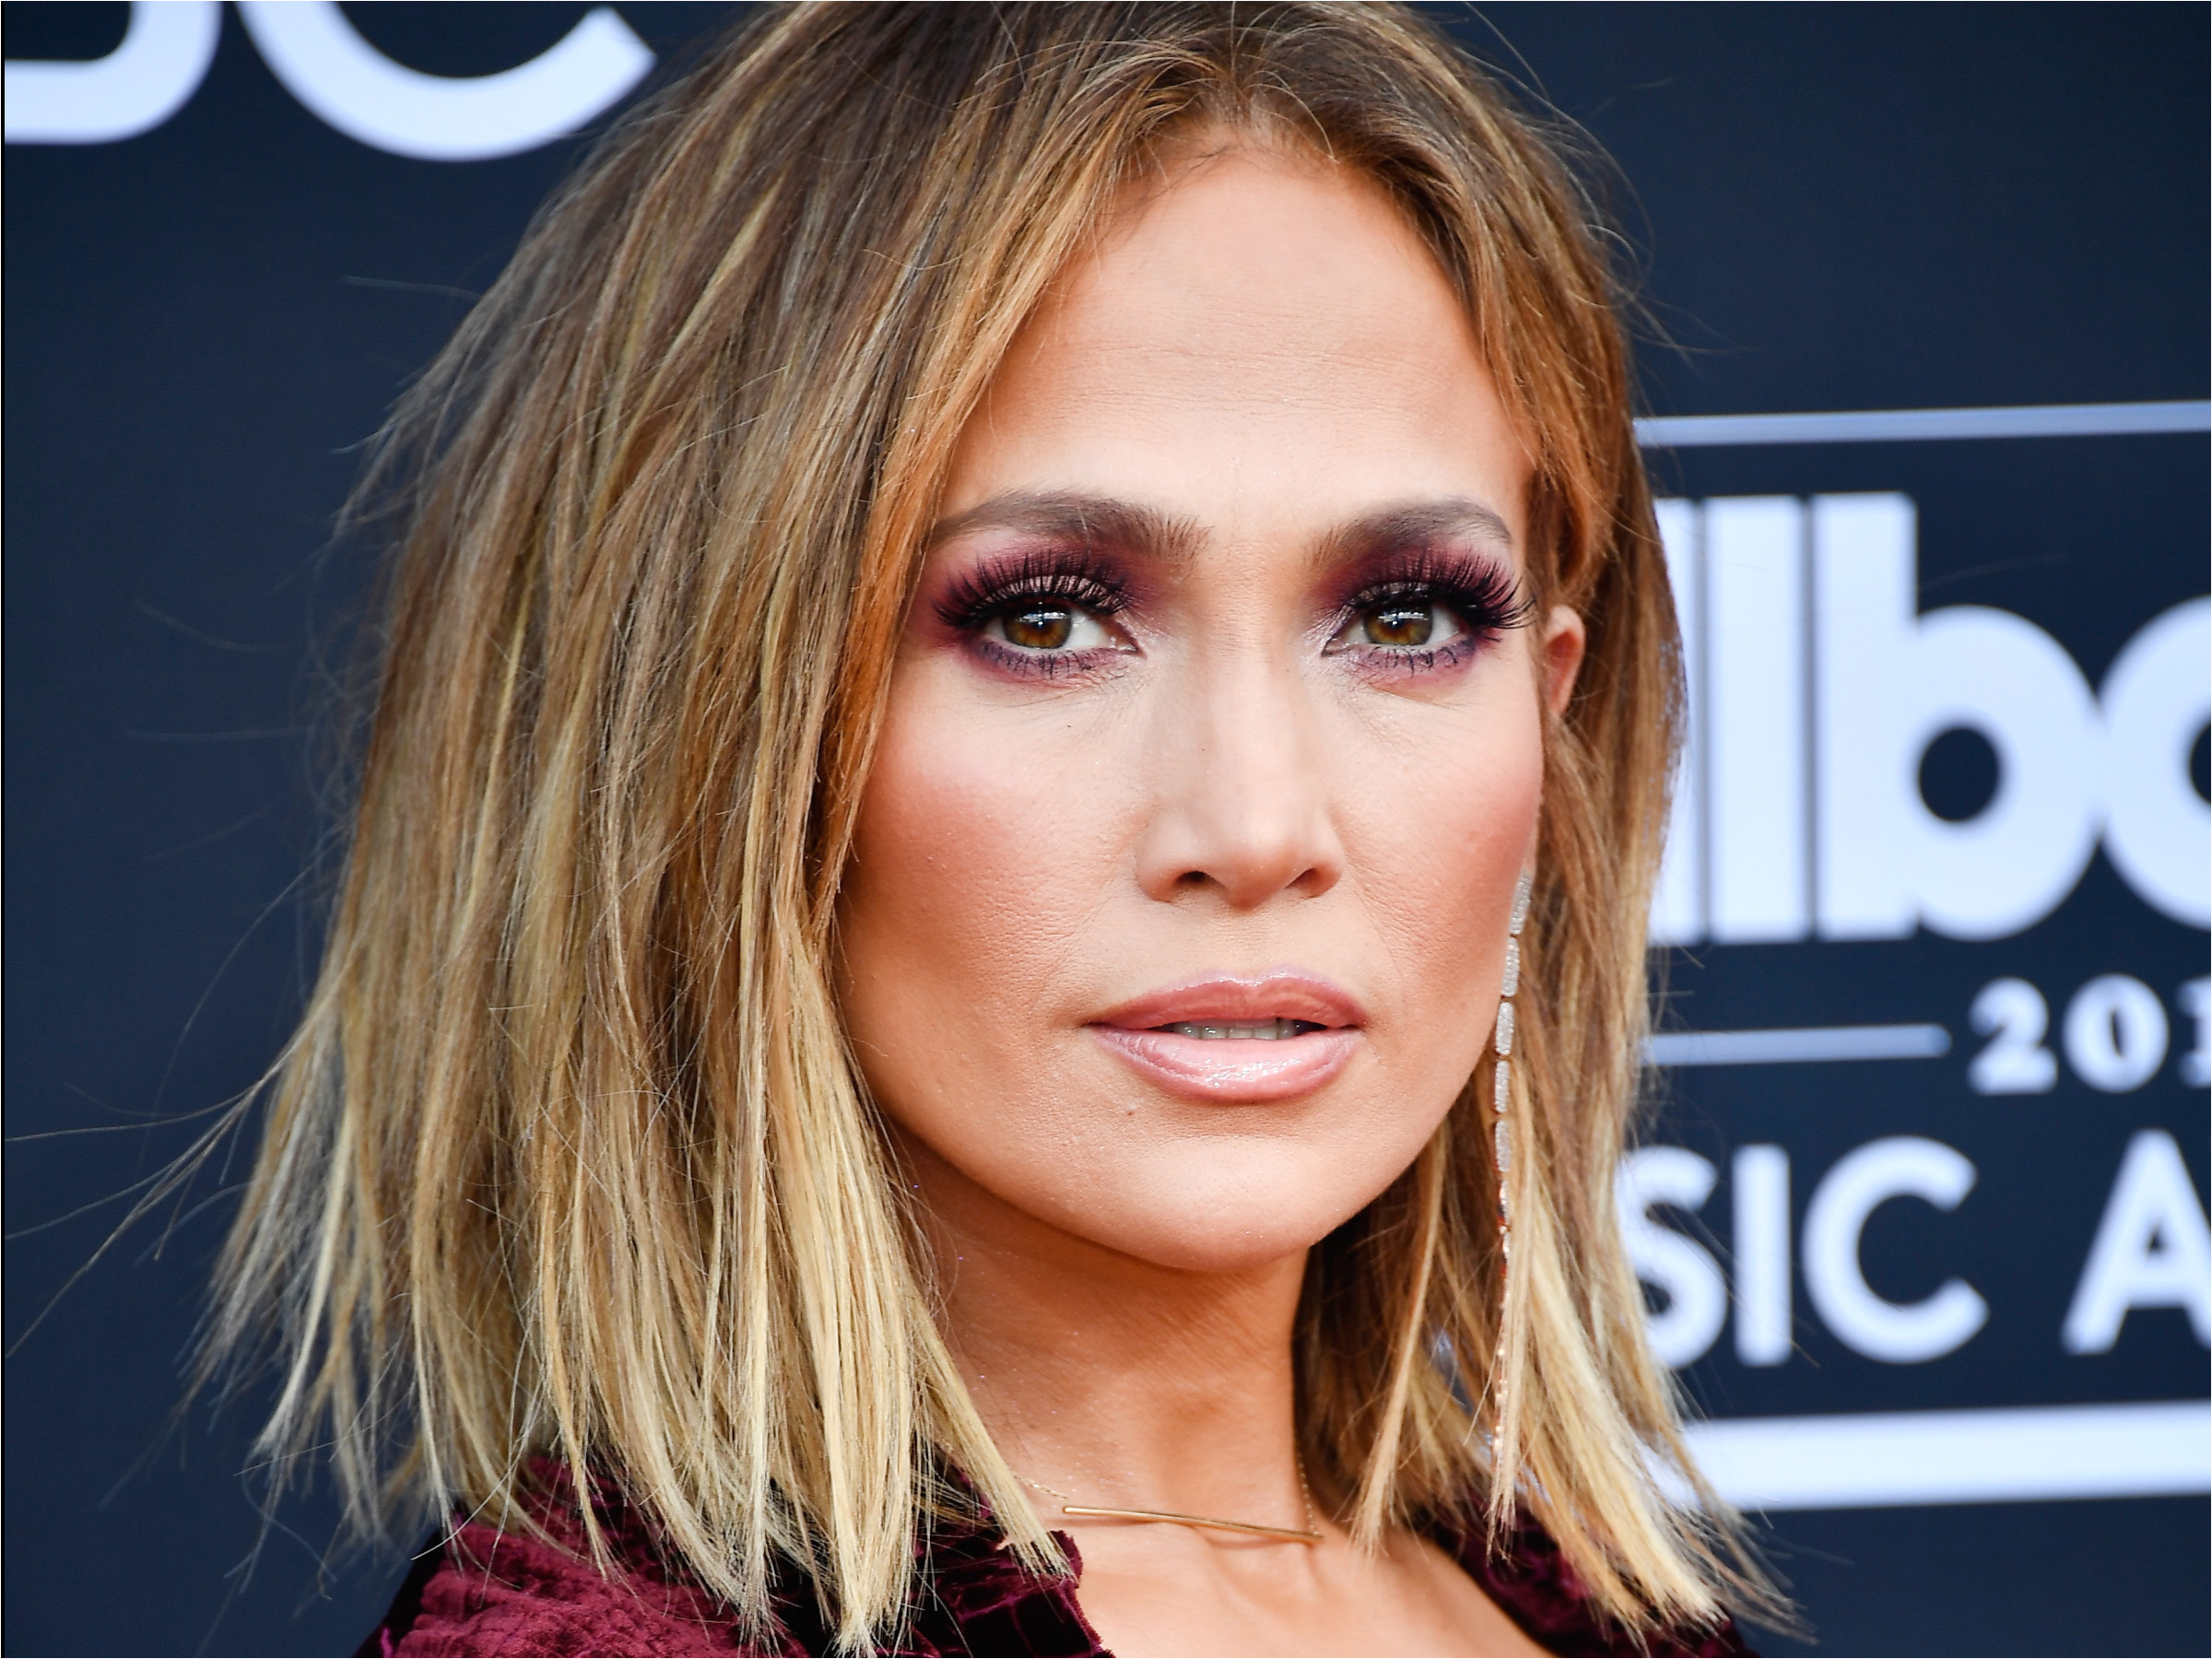 How Jennifer Lopez created an empire and built her net worth to a reported $400 million